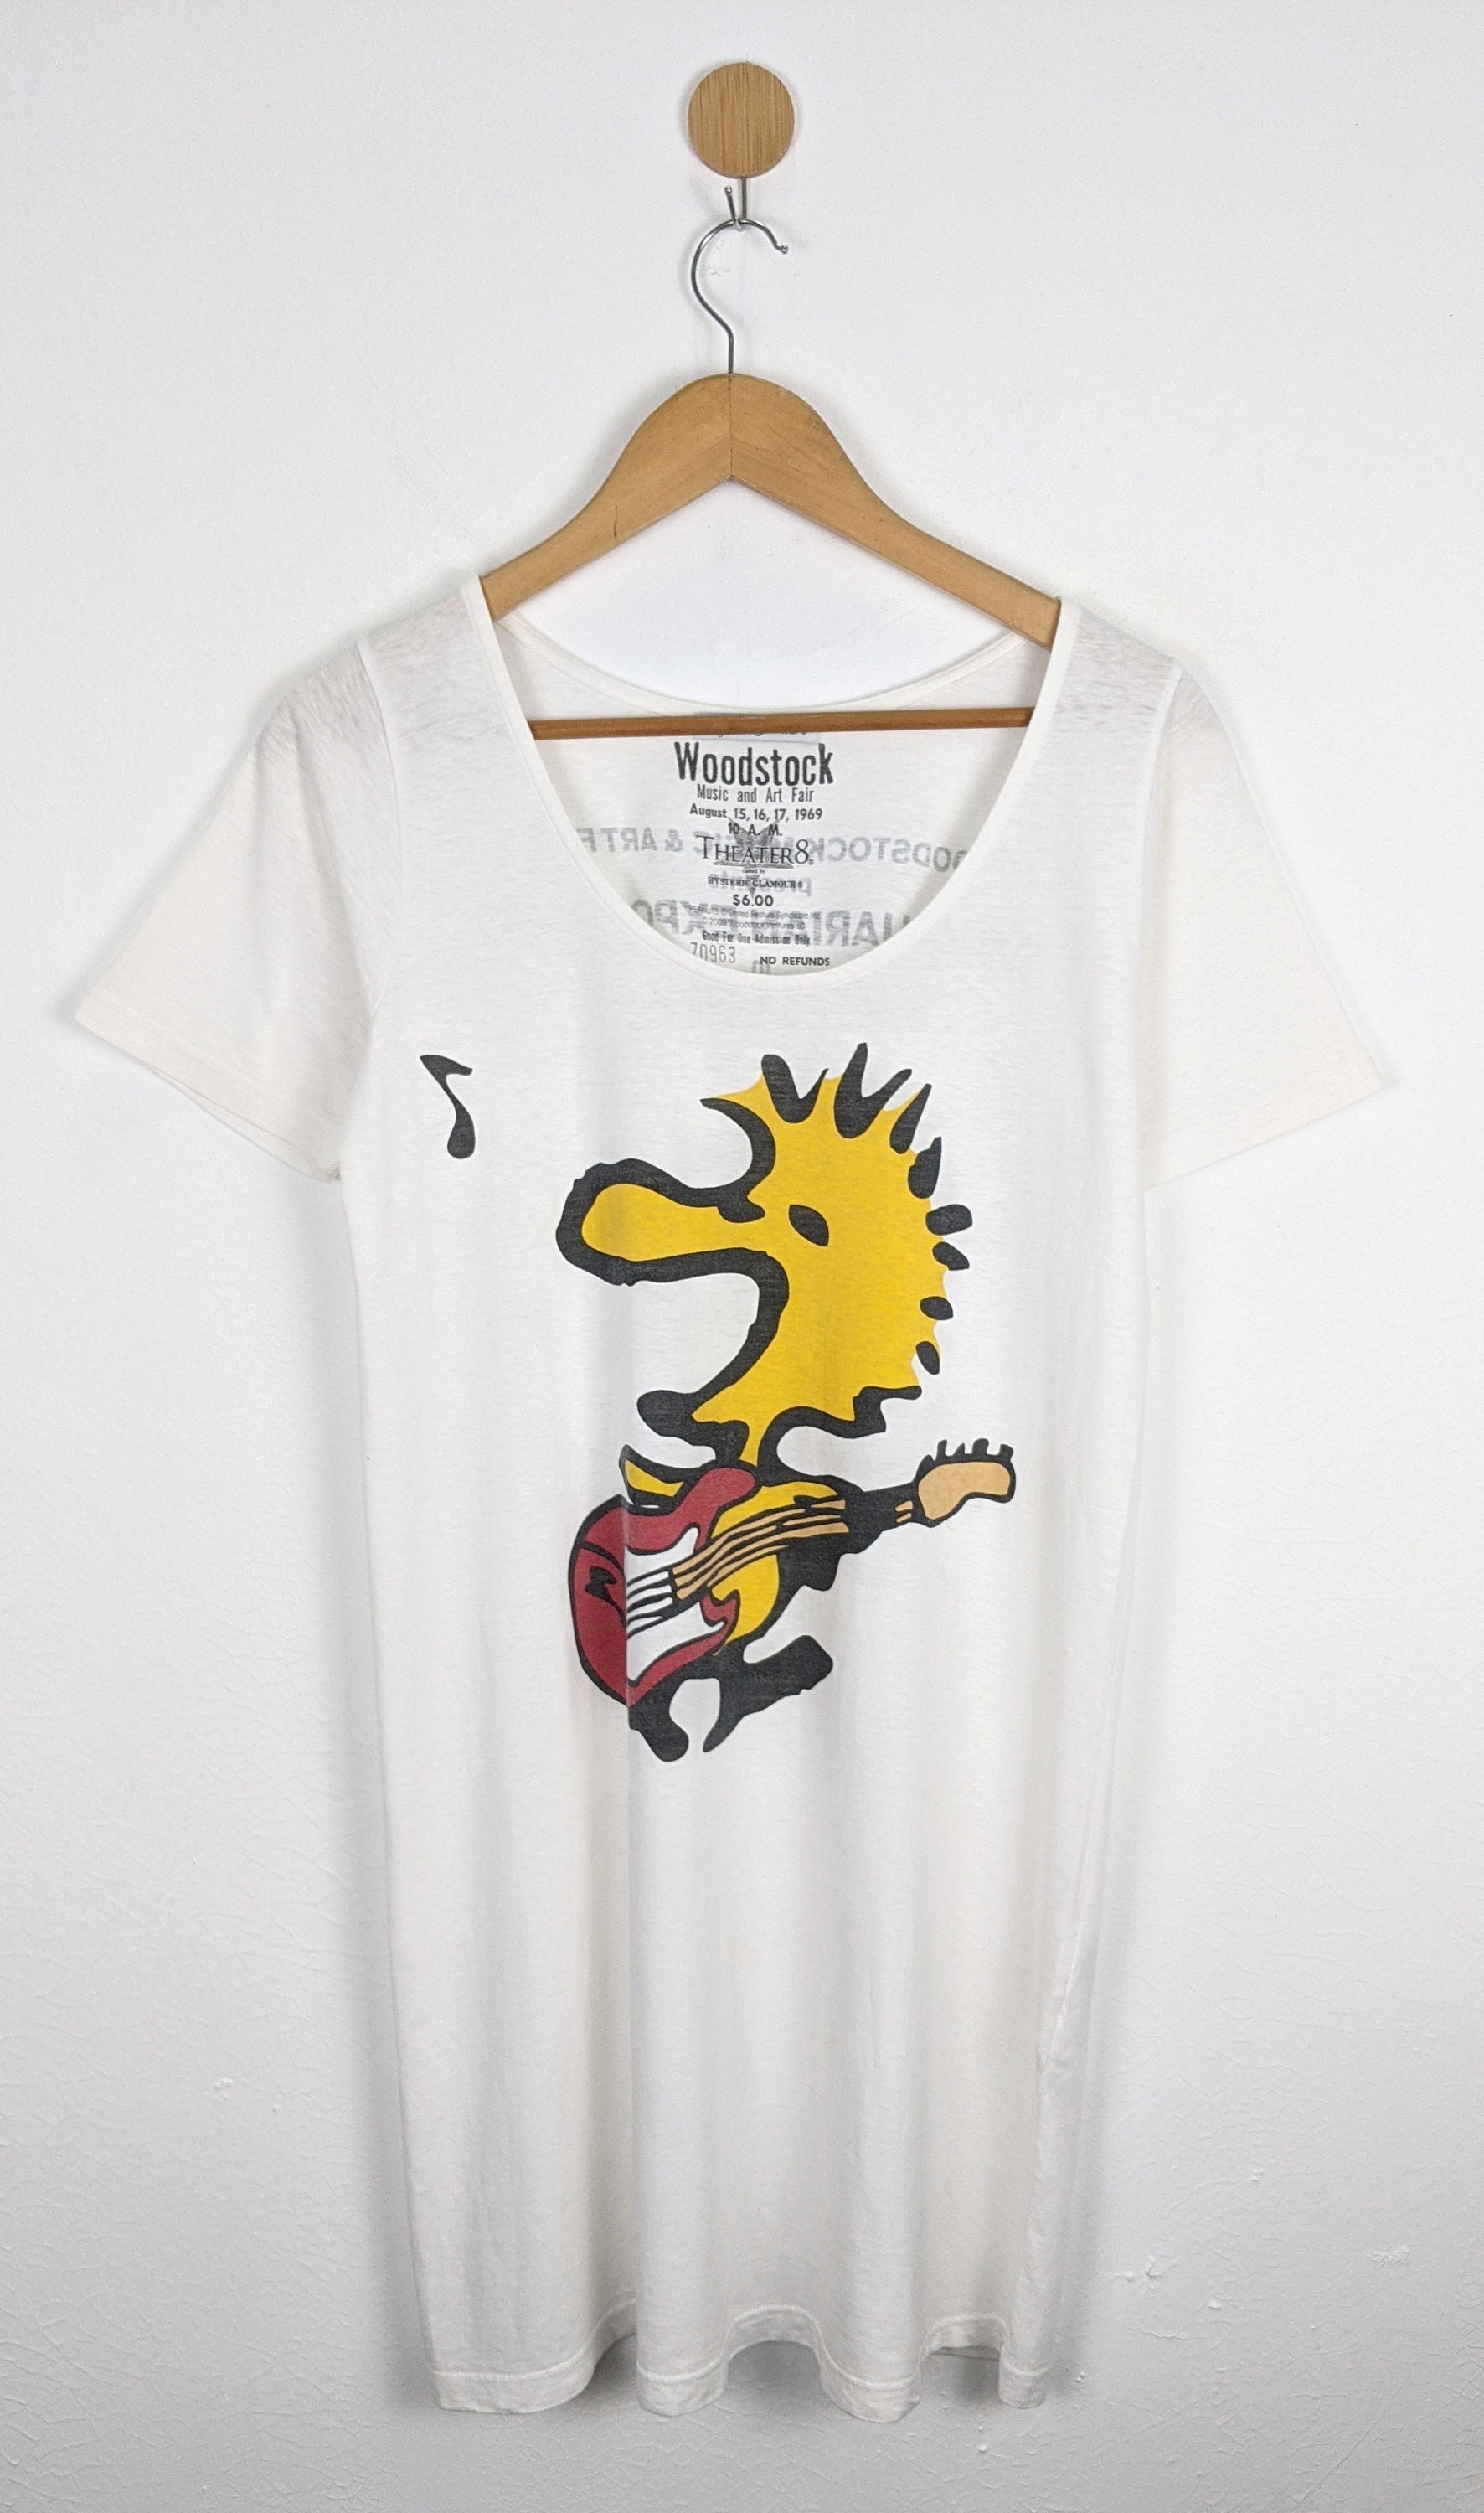 HYSTERIC GLAMOUR Woodstock Tシャツ